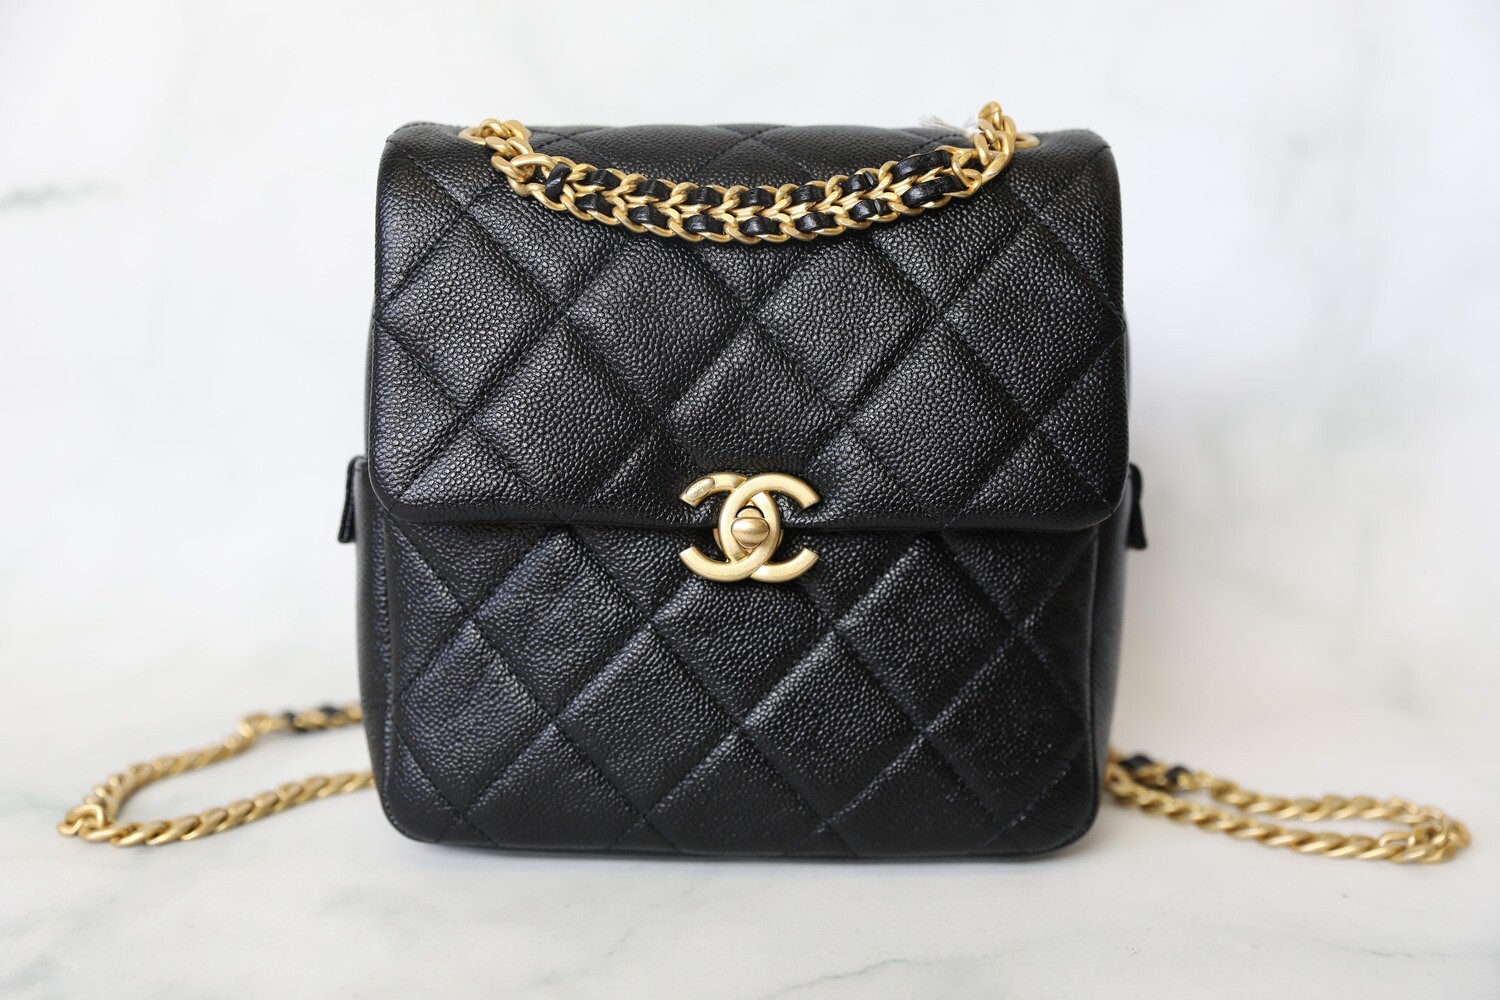 Chanel Melody Backpack, Black Caviar with Gold Hardware, Preowned in Box  WA001 - Julia Rose Boston